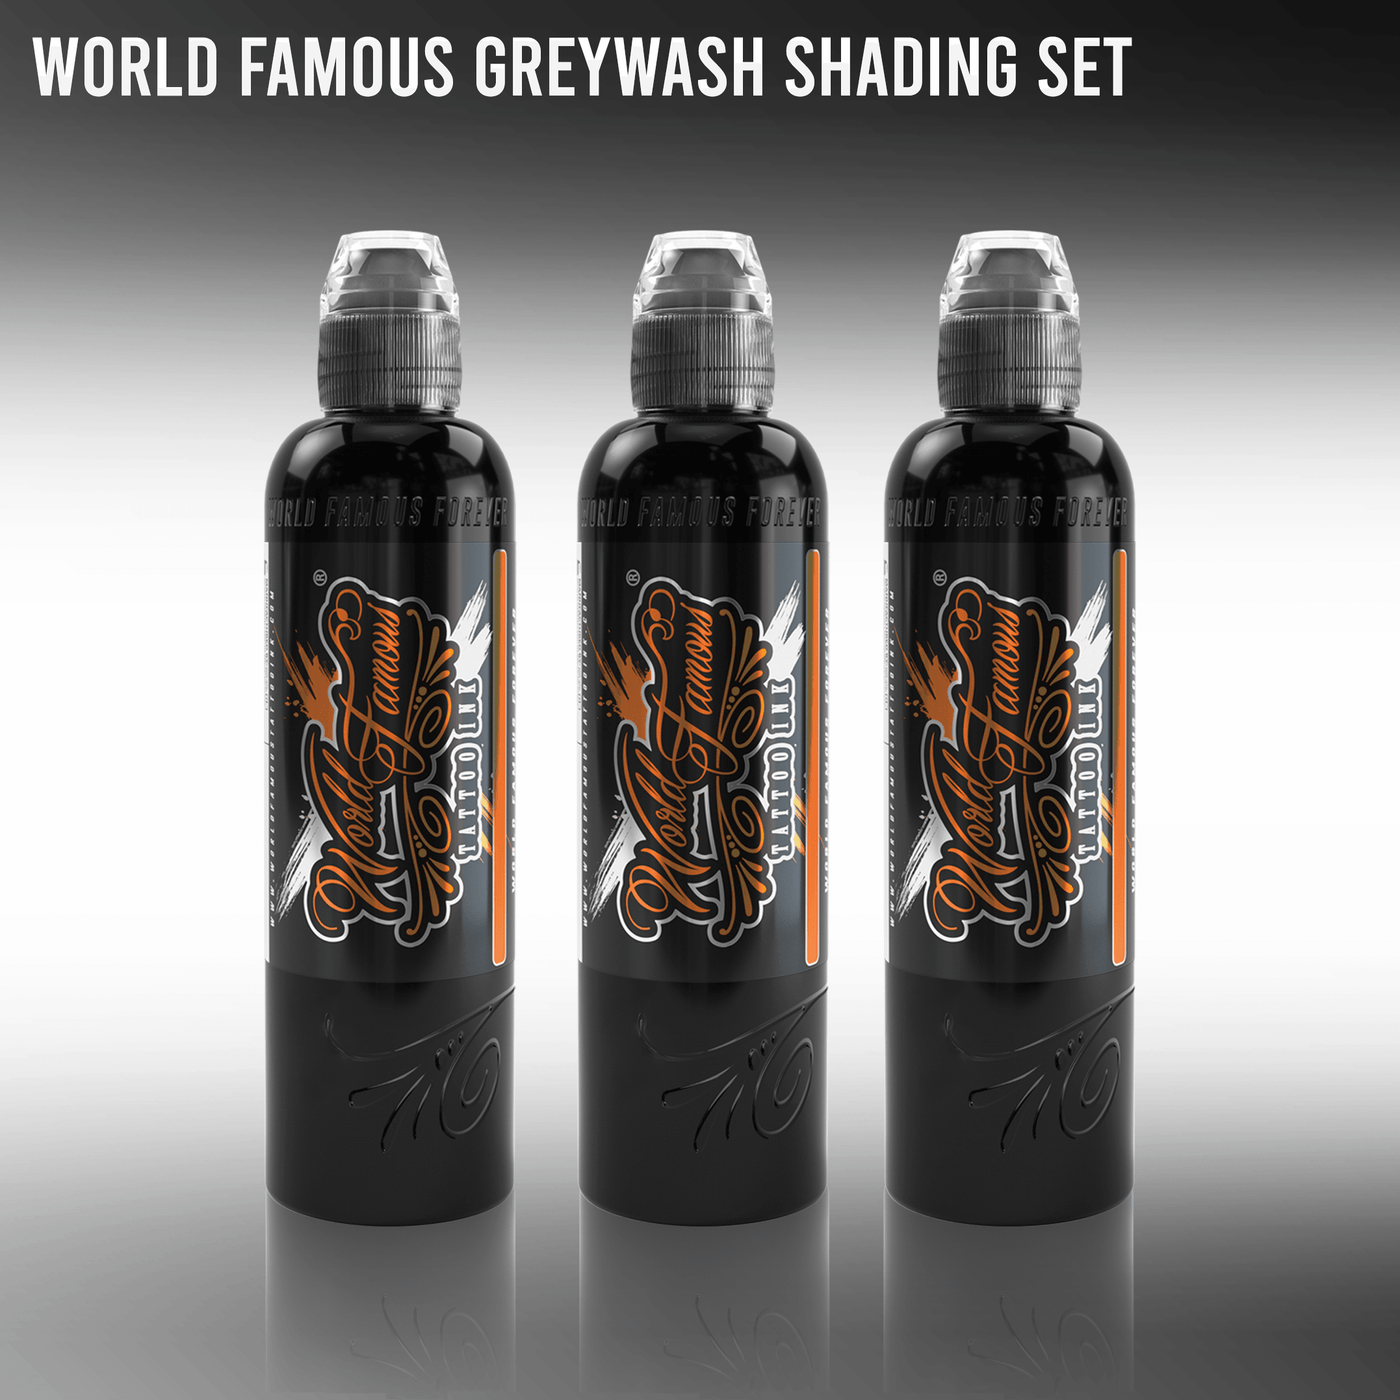 World Famous 3 Bottle Grey Wash Set - Tattoo Ink - Mithra Tattoo Supplies Canada